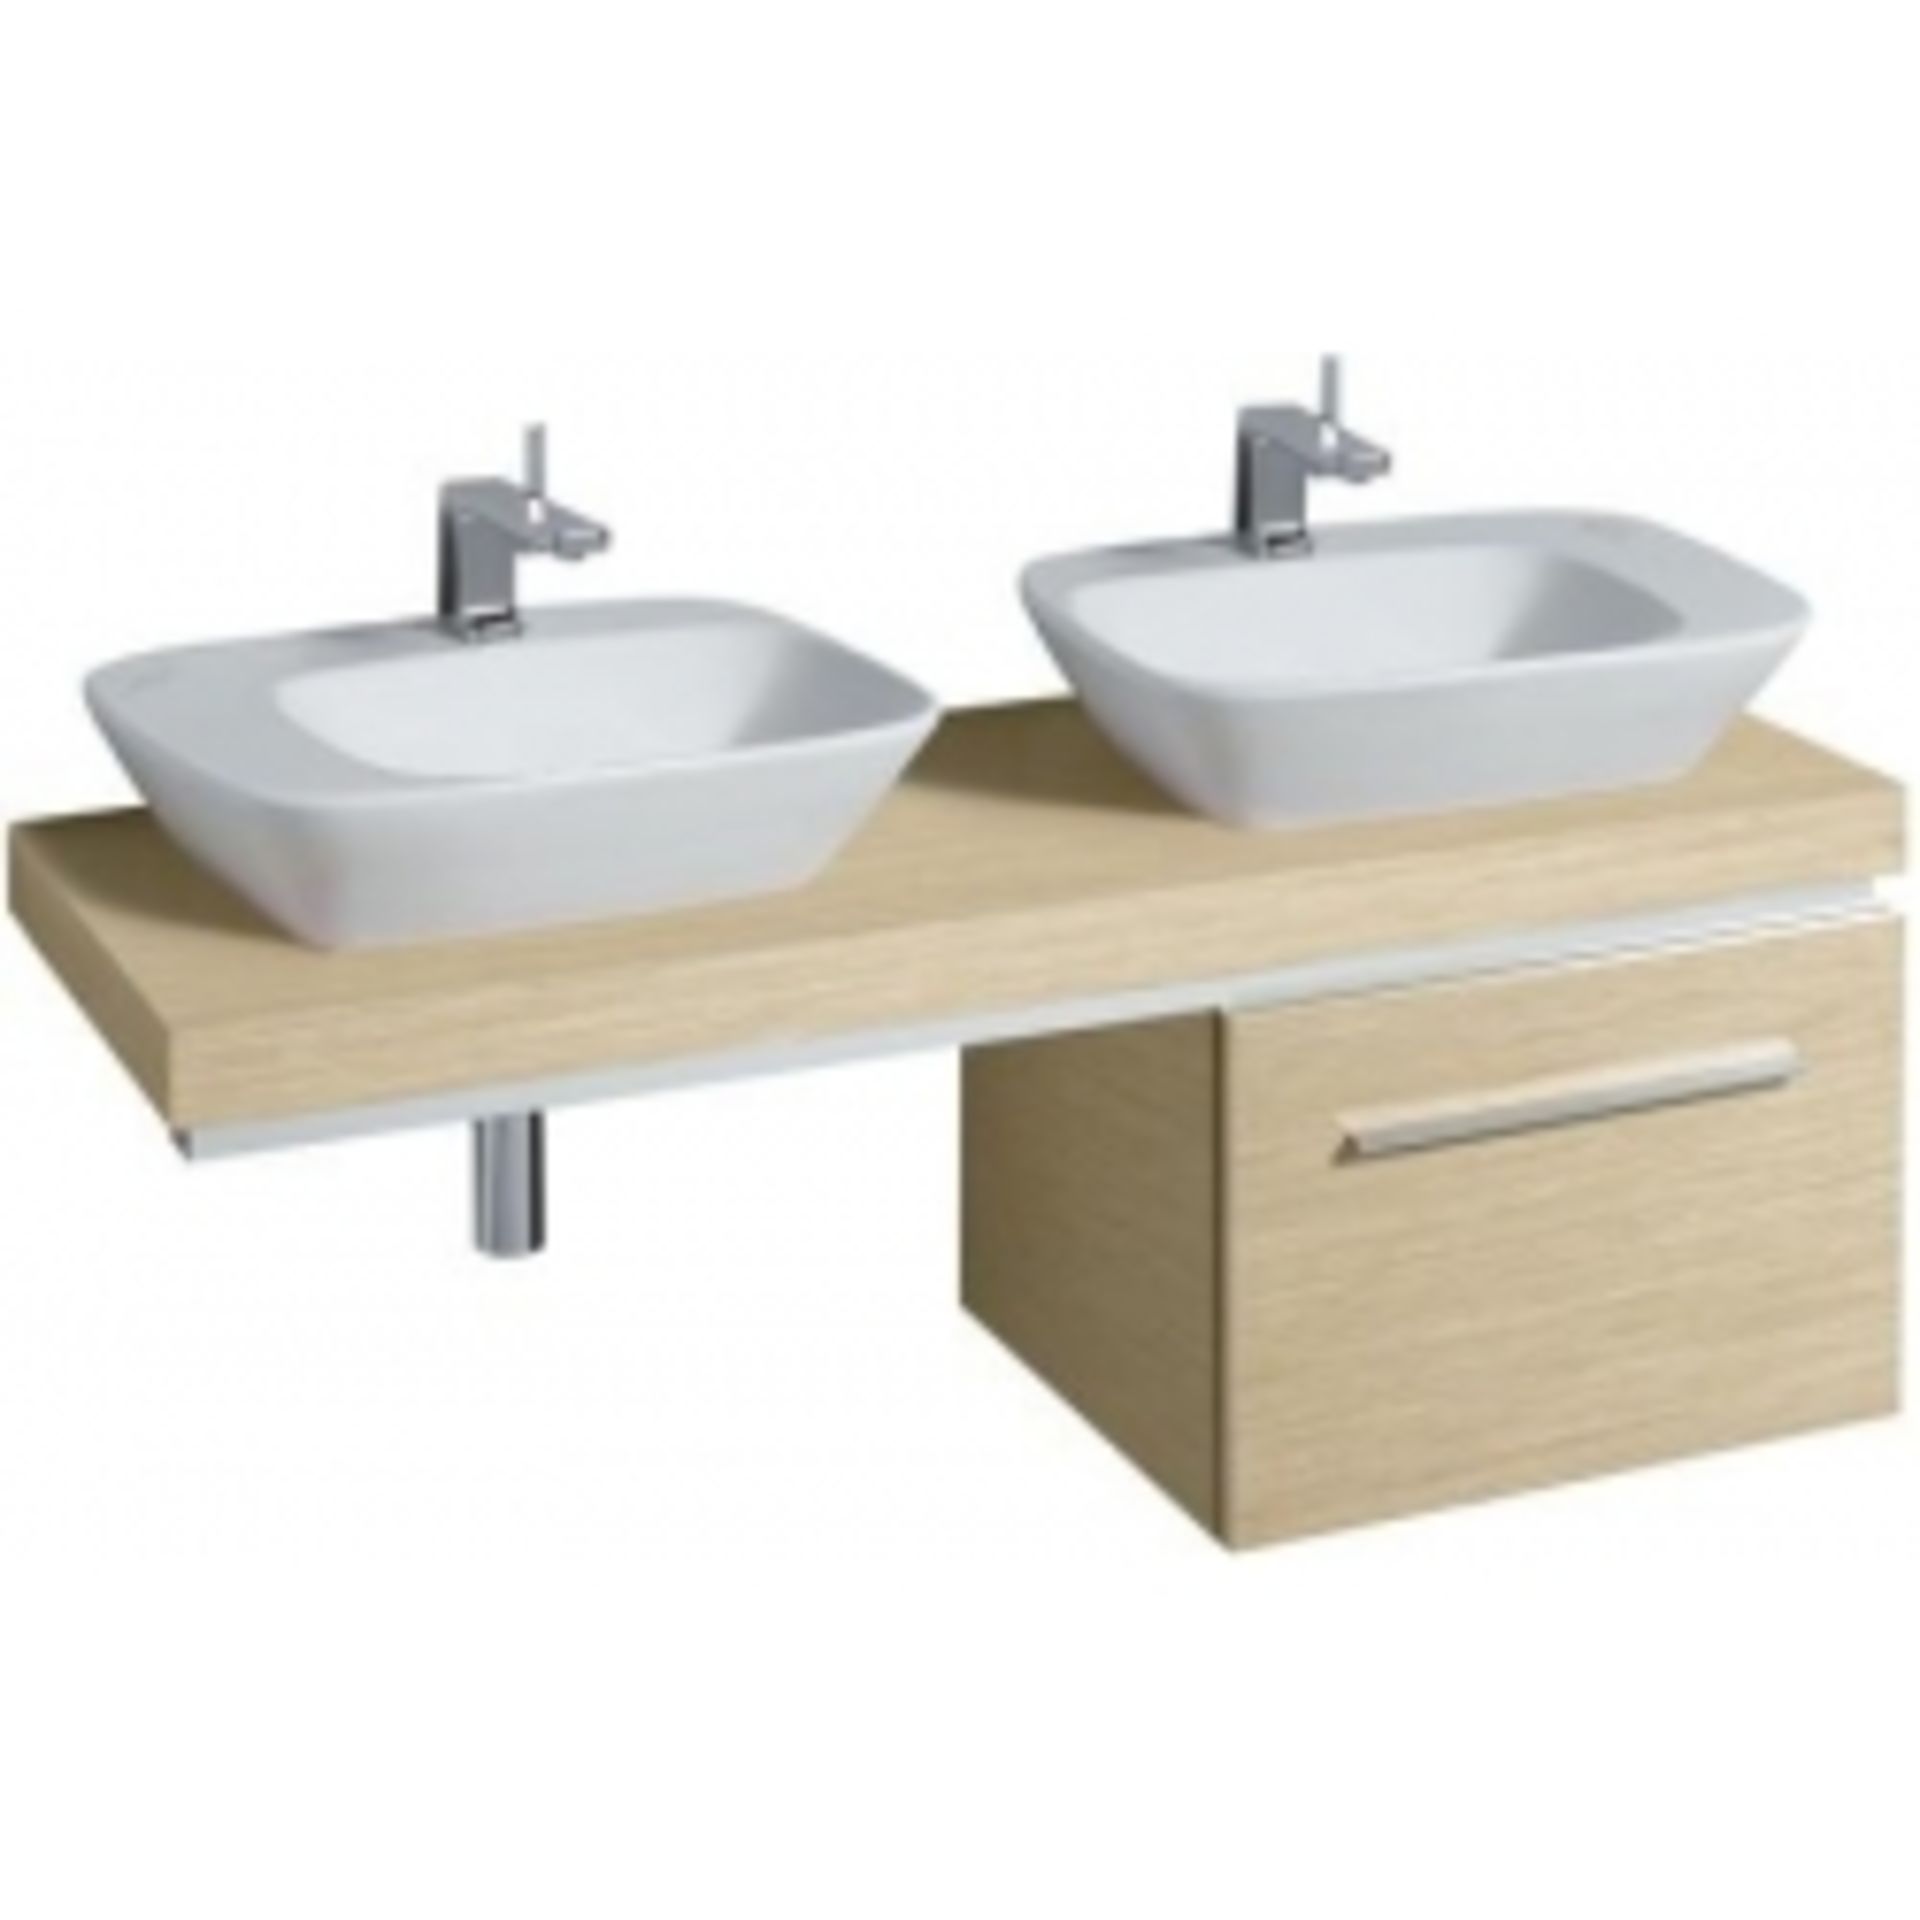 (PC7) 1000mm Keramag Silk Wall Hung Oak Basin Unit. RRP £981.99. .Comes complete with basin. ...( - Image 3 of 3